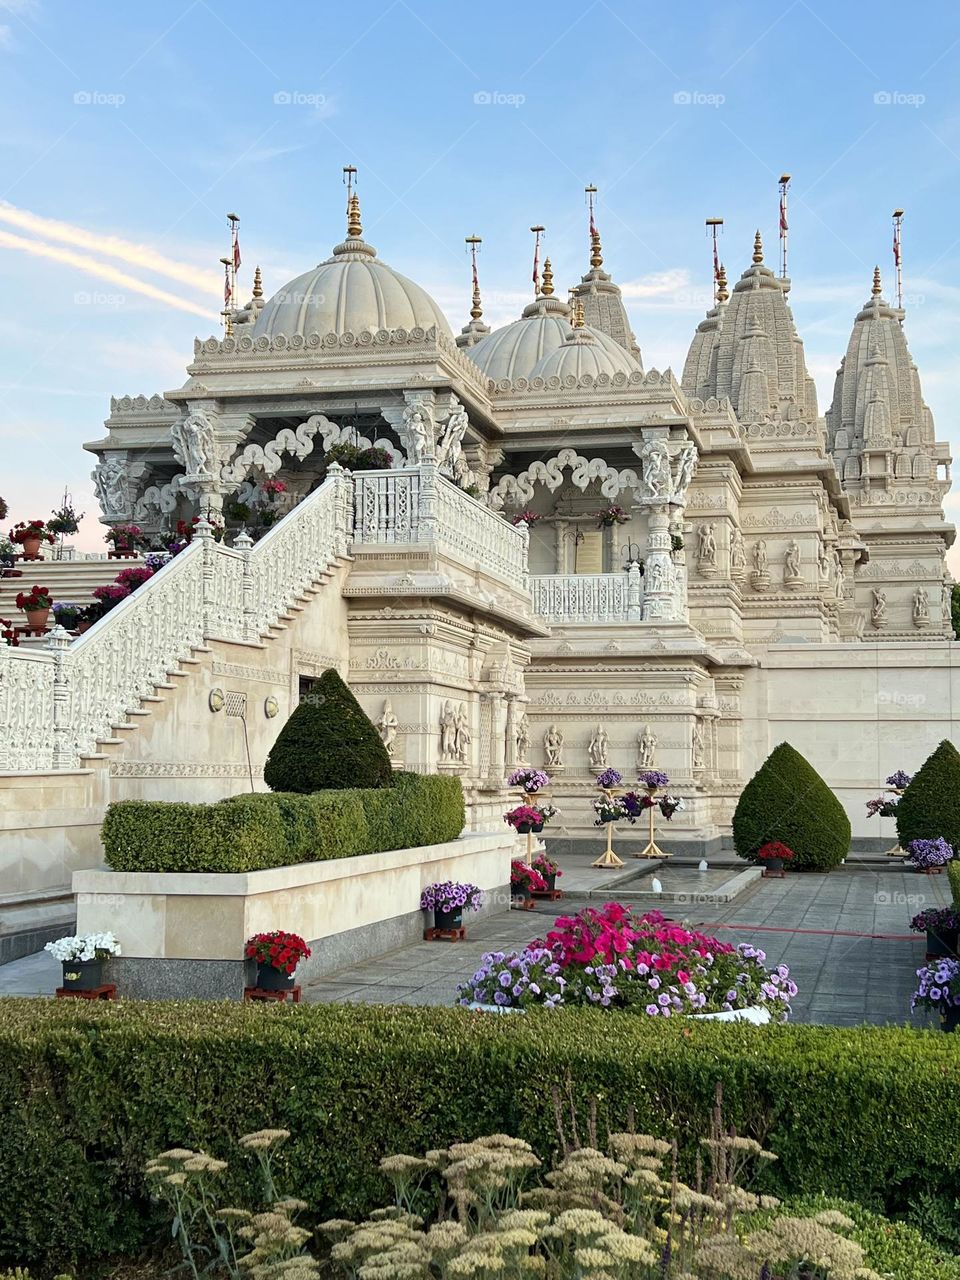 Amazing Baps Shri Swaminarayan Mandir Temple in London, England (also commonly known as the Neasden Temple).The Swaminarayan Mandir has been described as being Britain’s first authentic Hindu temple.